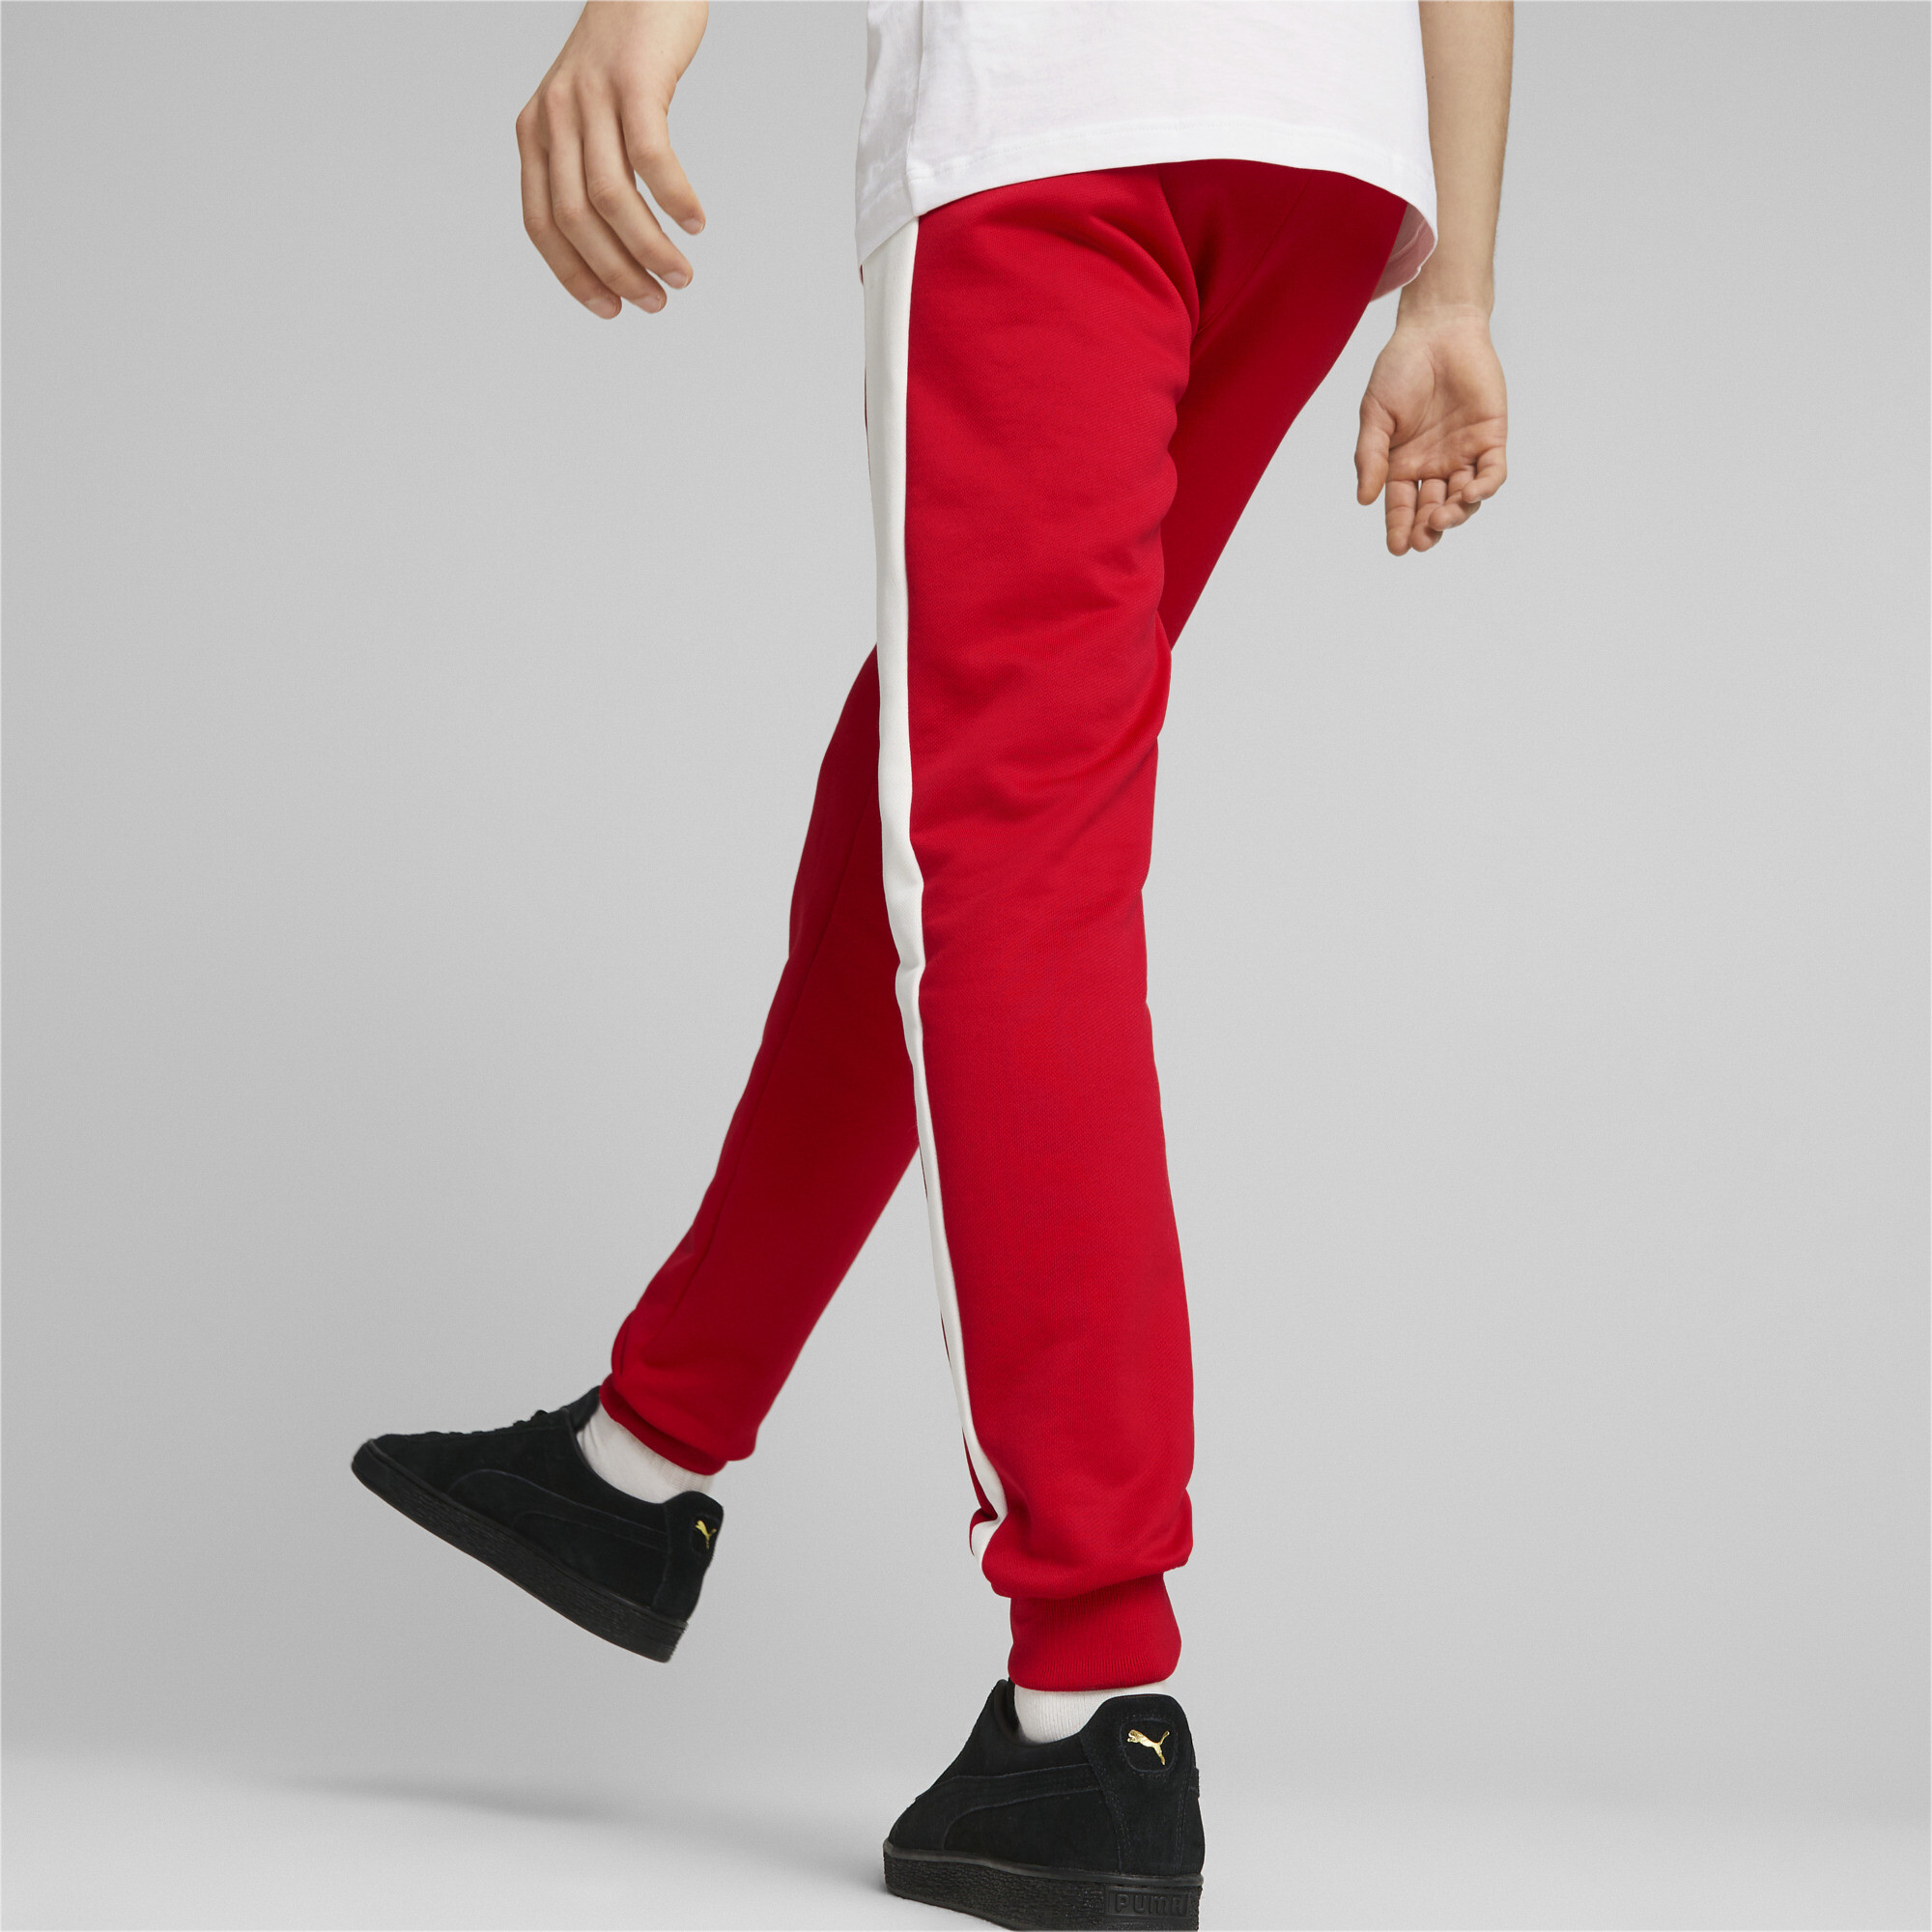 Men's PUMA Iconic T7 Track Pants In Red, Size Small